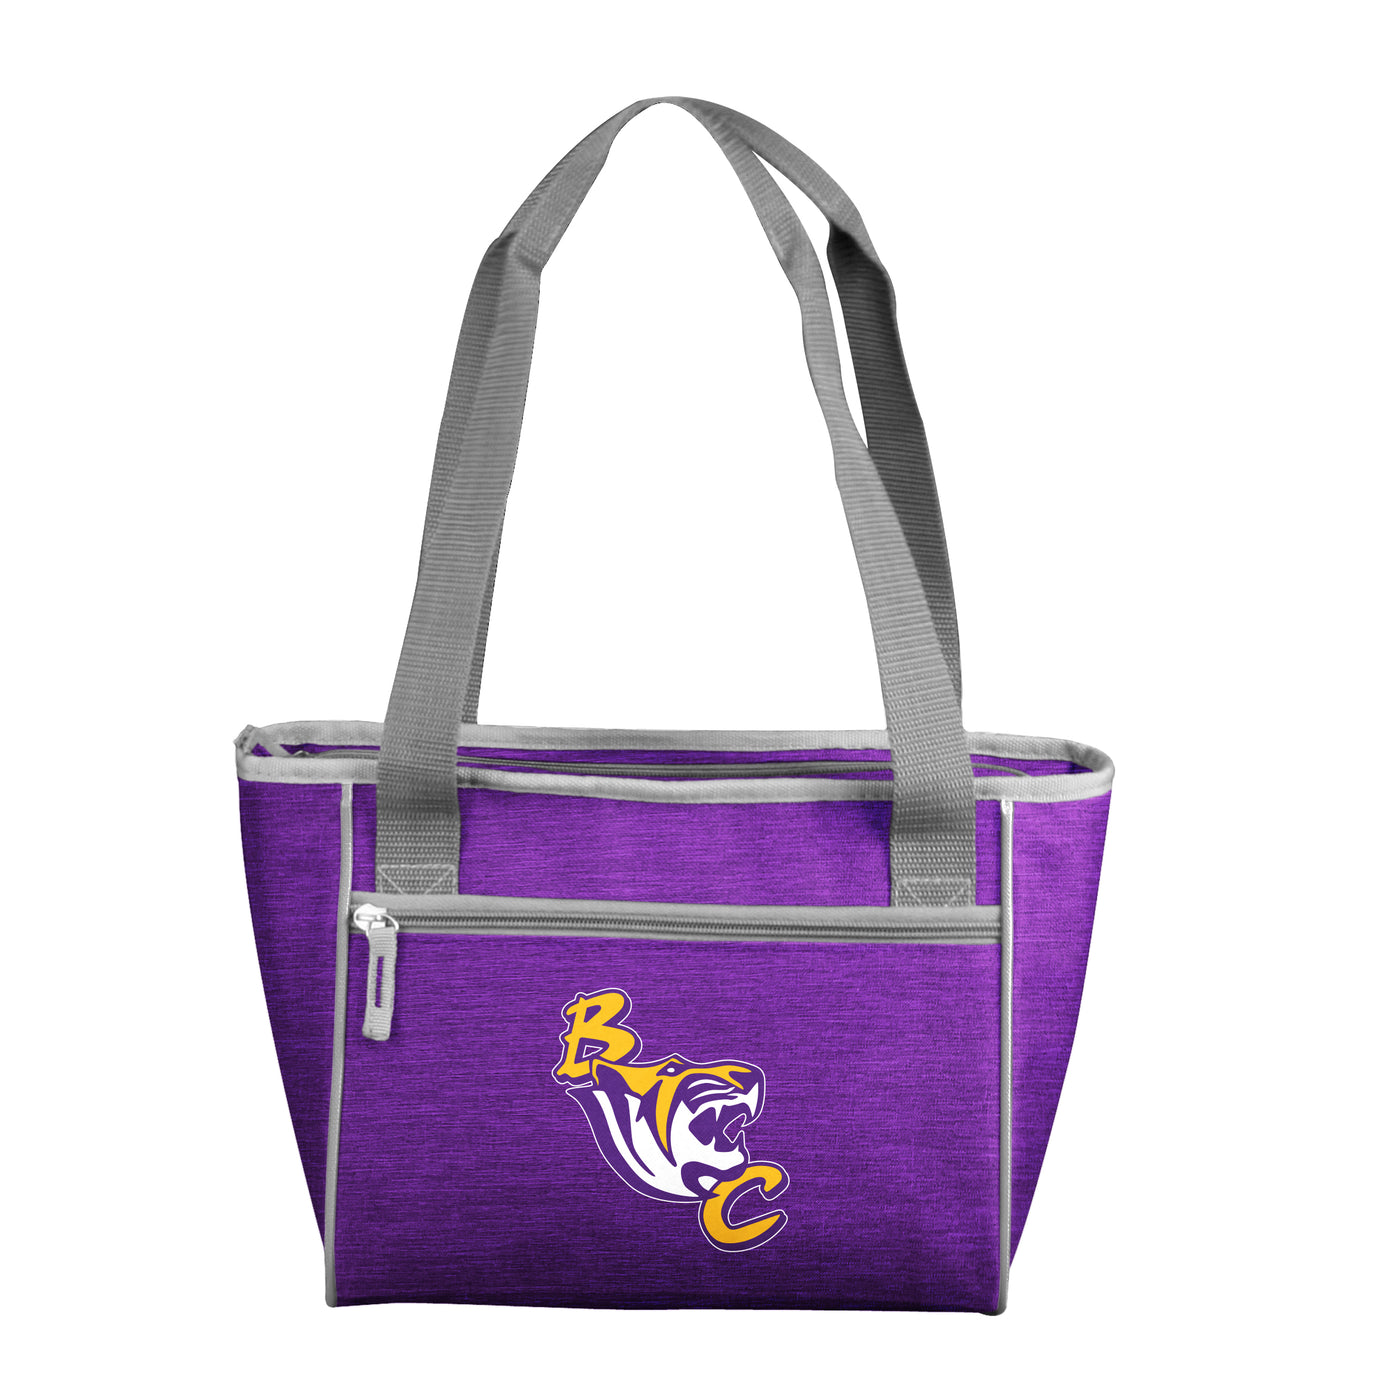 Benedict College 16 Can Cooler Tote